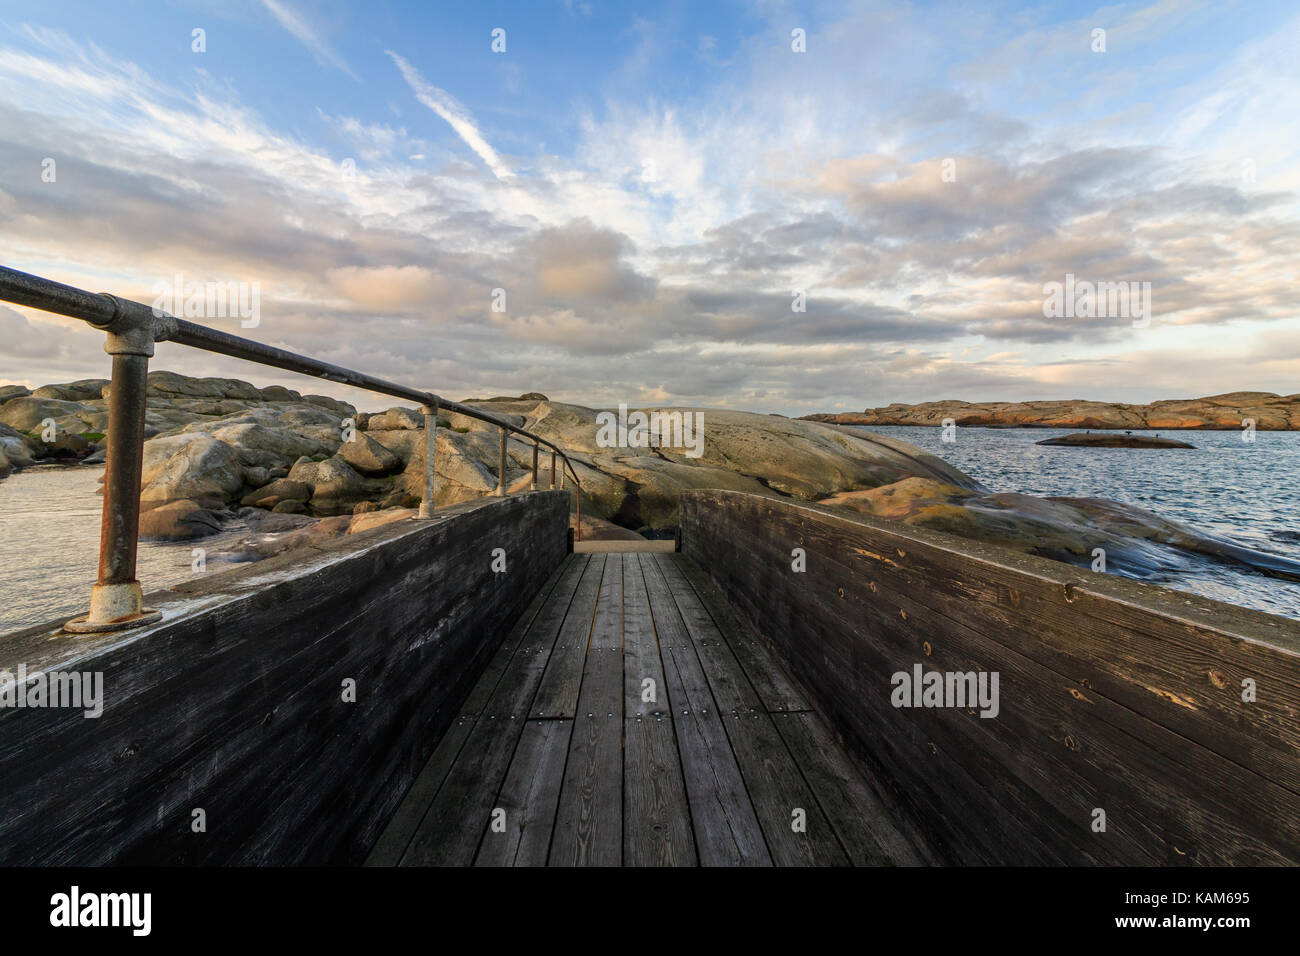 wood bridge in sea landscape with clouds and sky above, Verdens Ende Vestfold, Norway Stock Photo